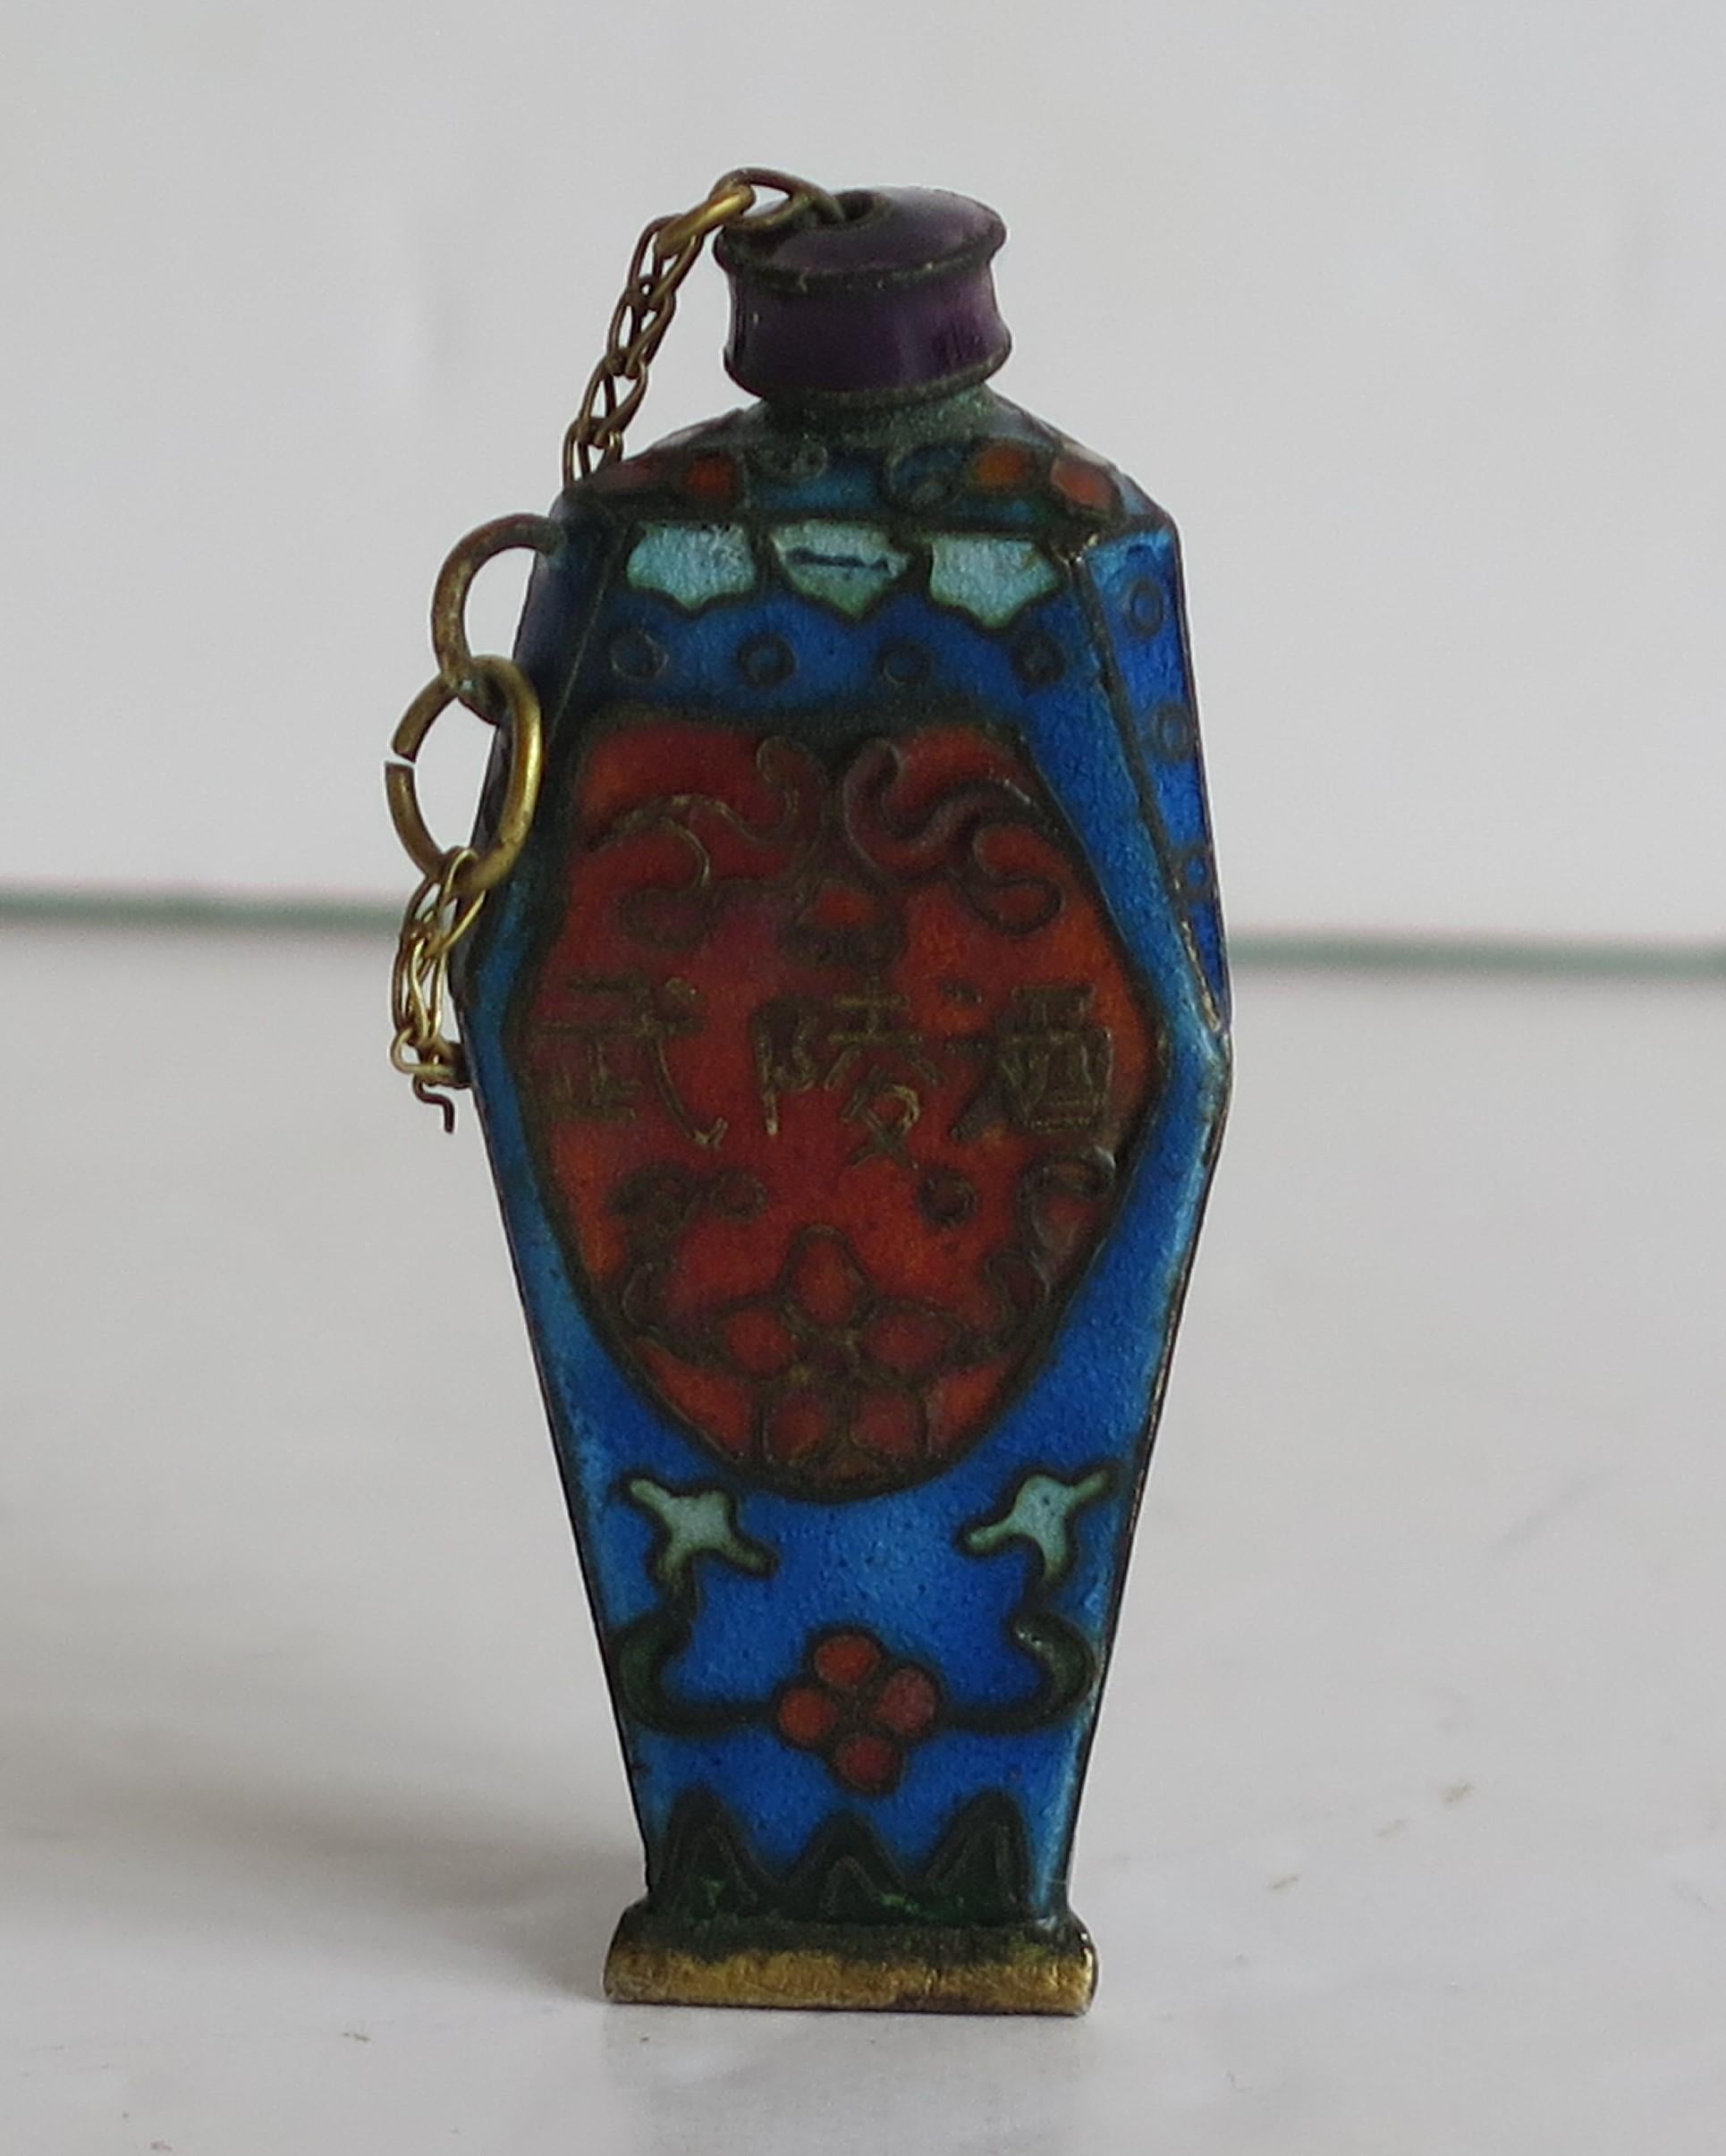 This is a very good example of a small rare shaped triangular Chinese snuff bottle, made from cloisonne´ with hand enamelled decoration depicting various floral designs and complete with its original chained stopper, all dating to the 19th century